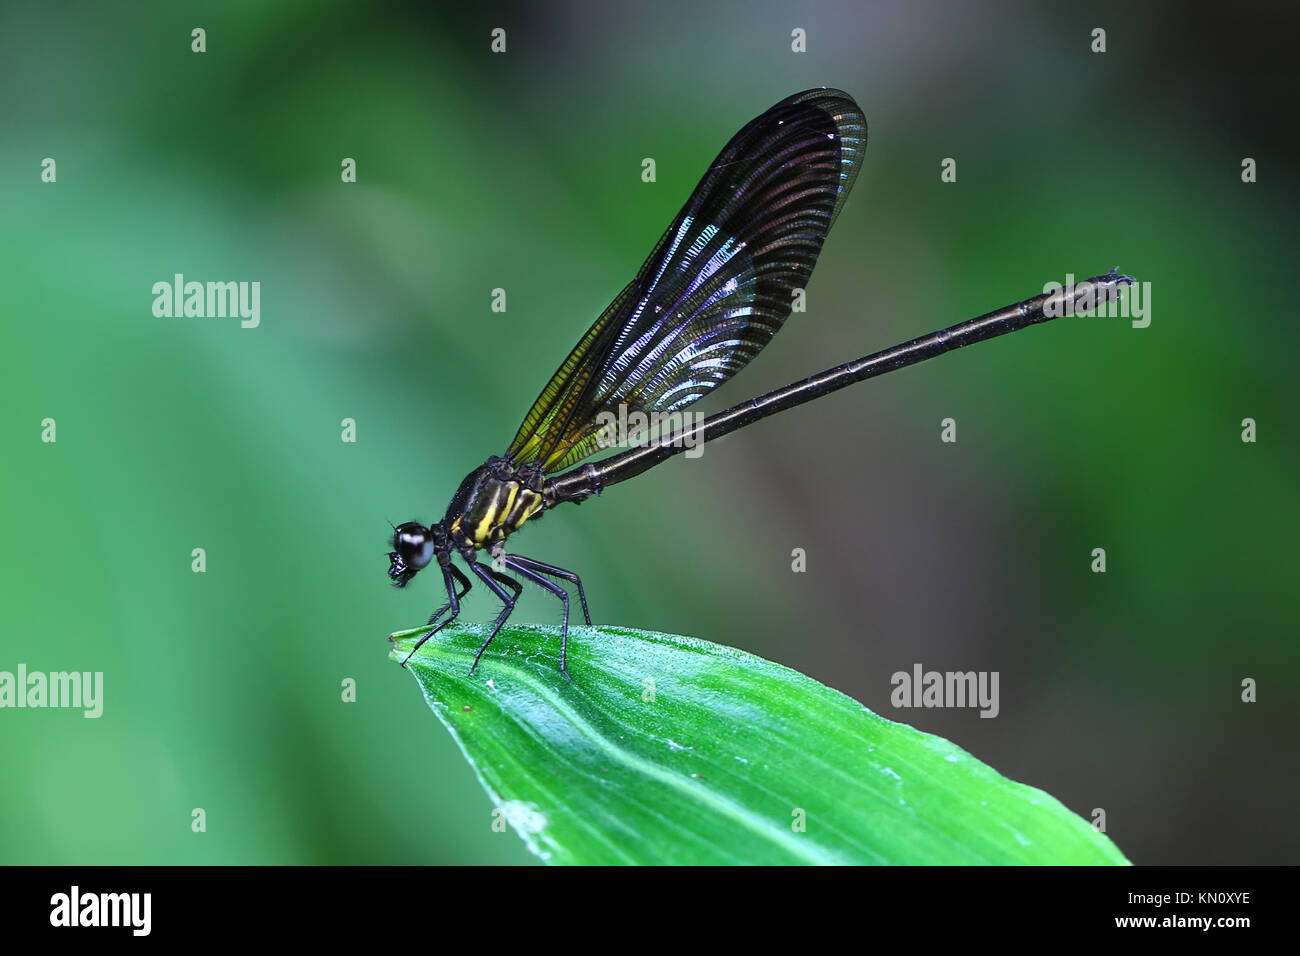 Yellow Damselfy/Dragon Fly/Zygoptera sitting in the edge of green leaf Stock Photo